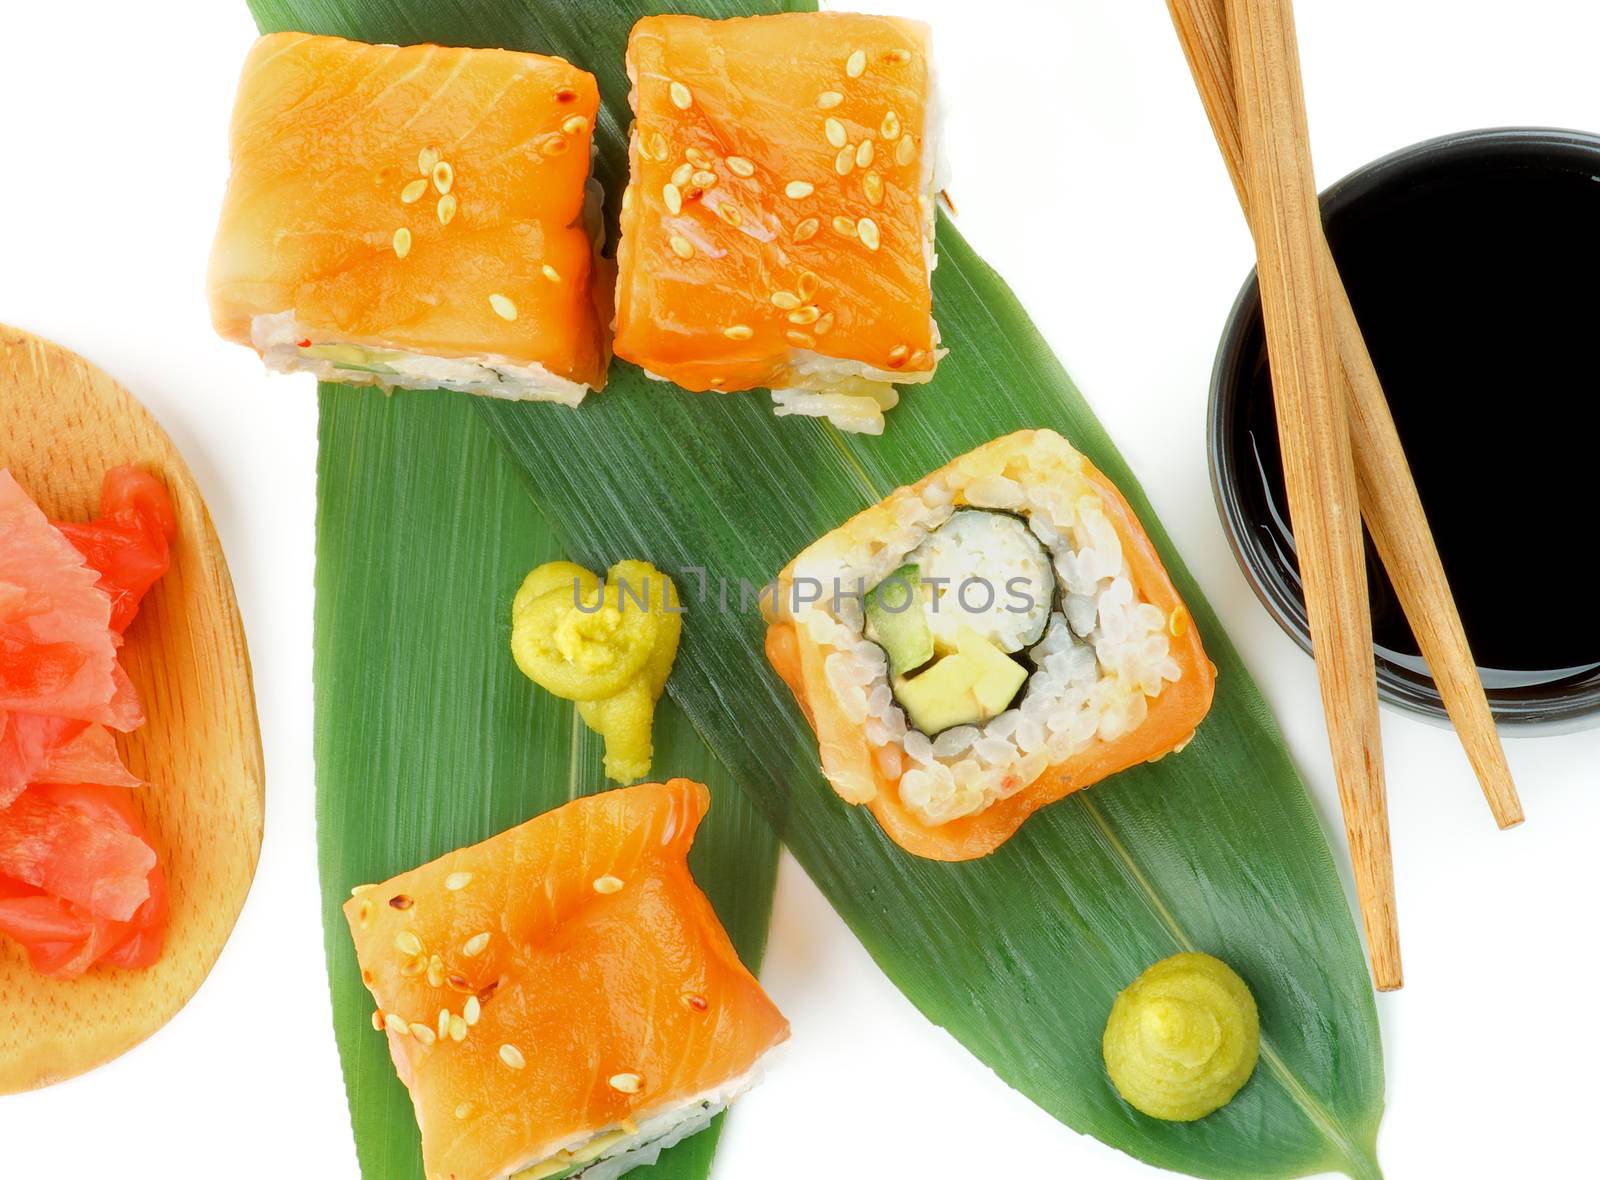 Delicious Salmon Maki Sushi with Crab, Avocado and Cheese on Green Palm Leafs with Soy Sauce, Ginger and Pair of Chopsticks closeup on white background. Top View